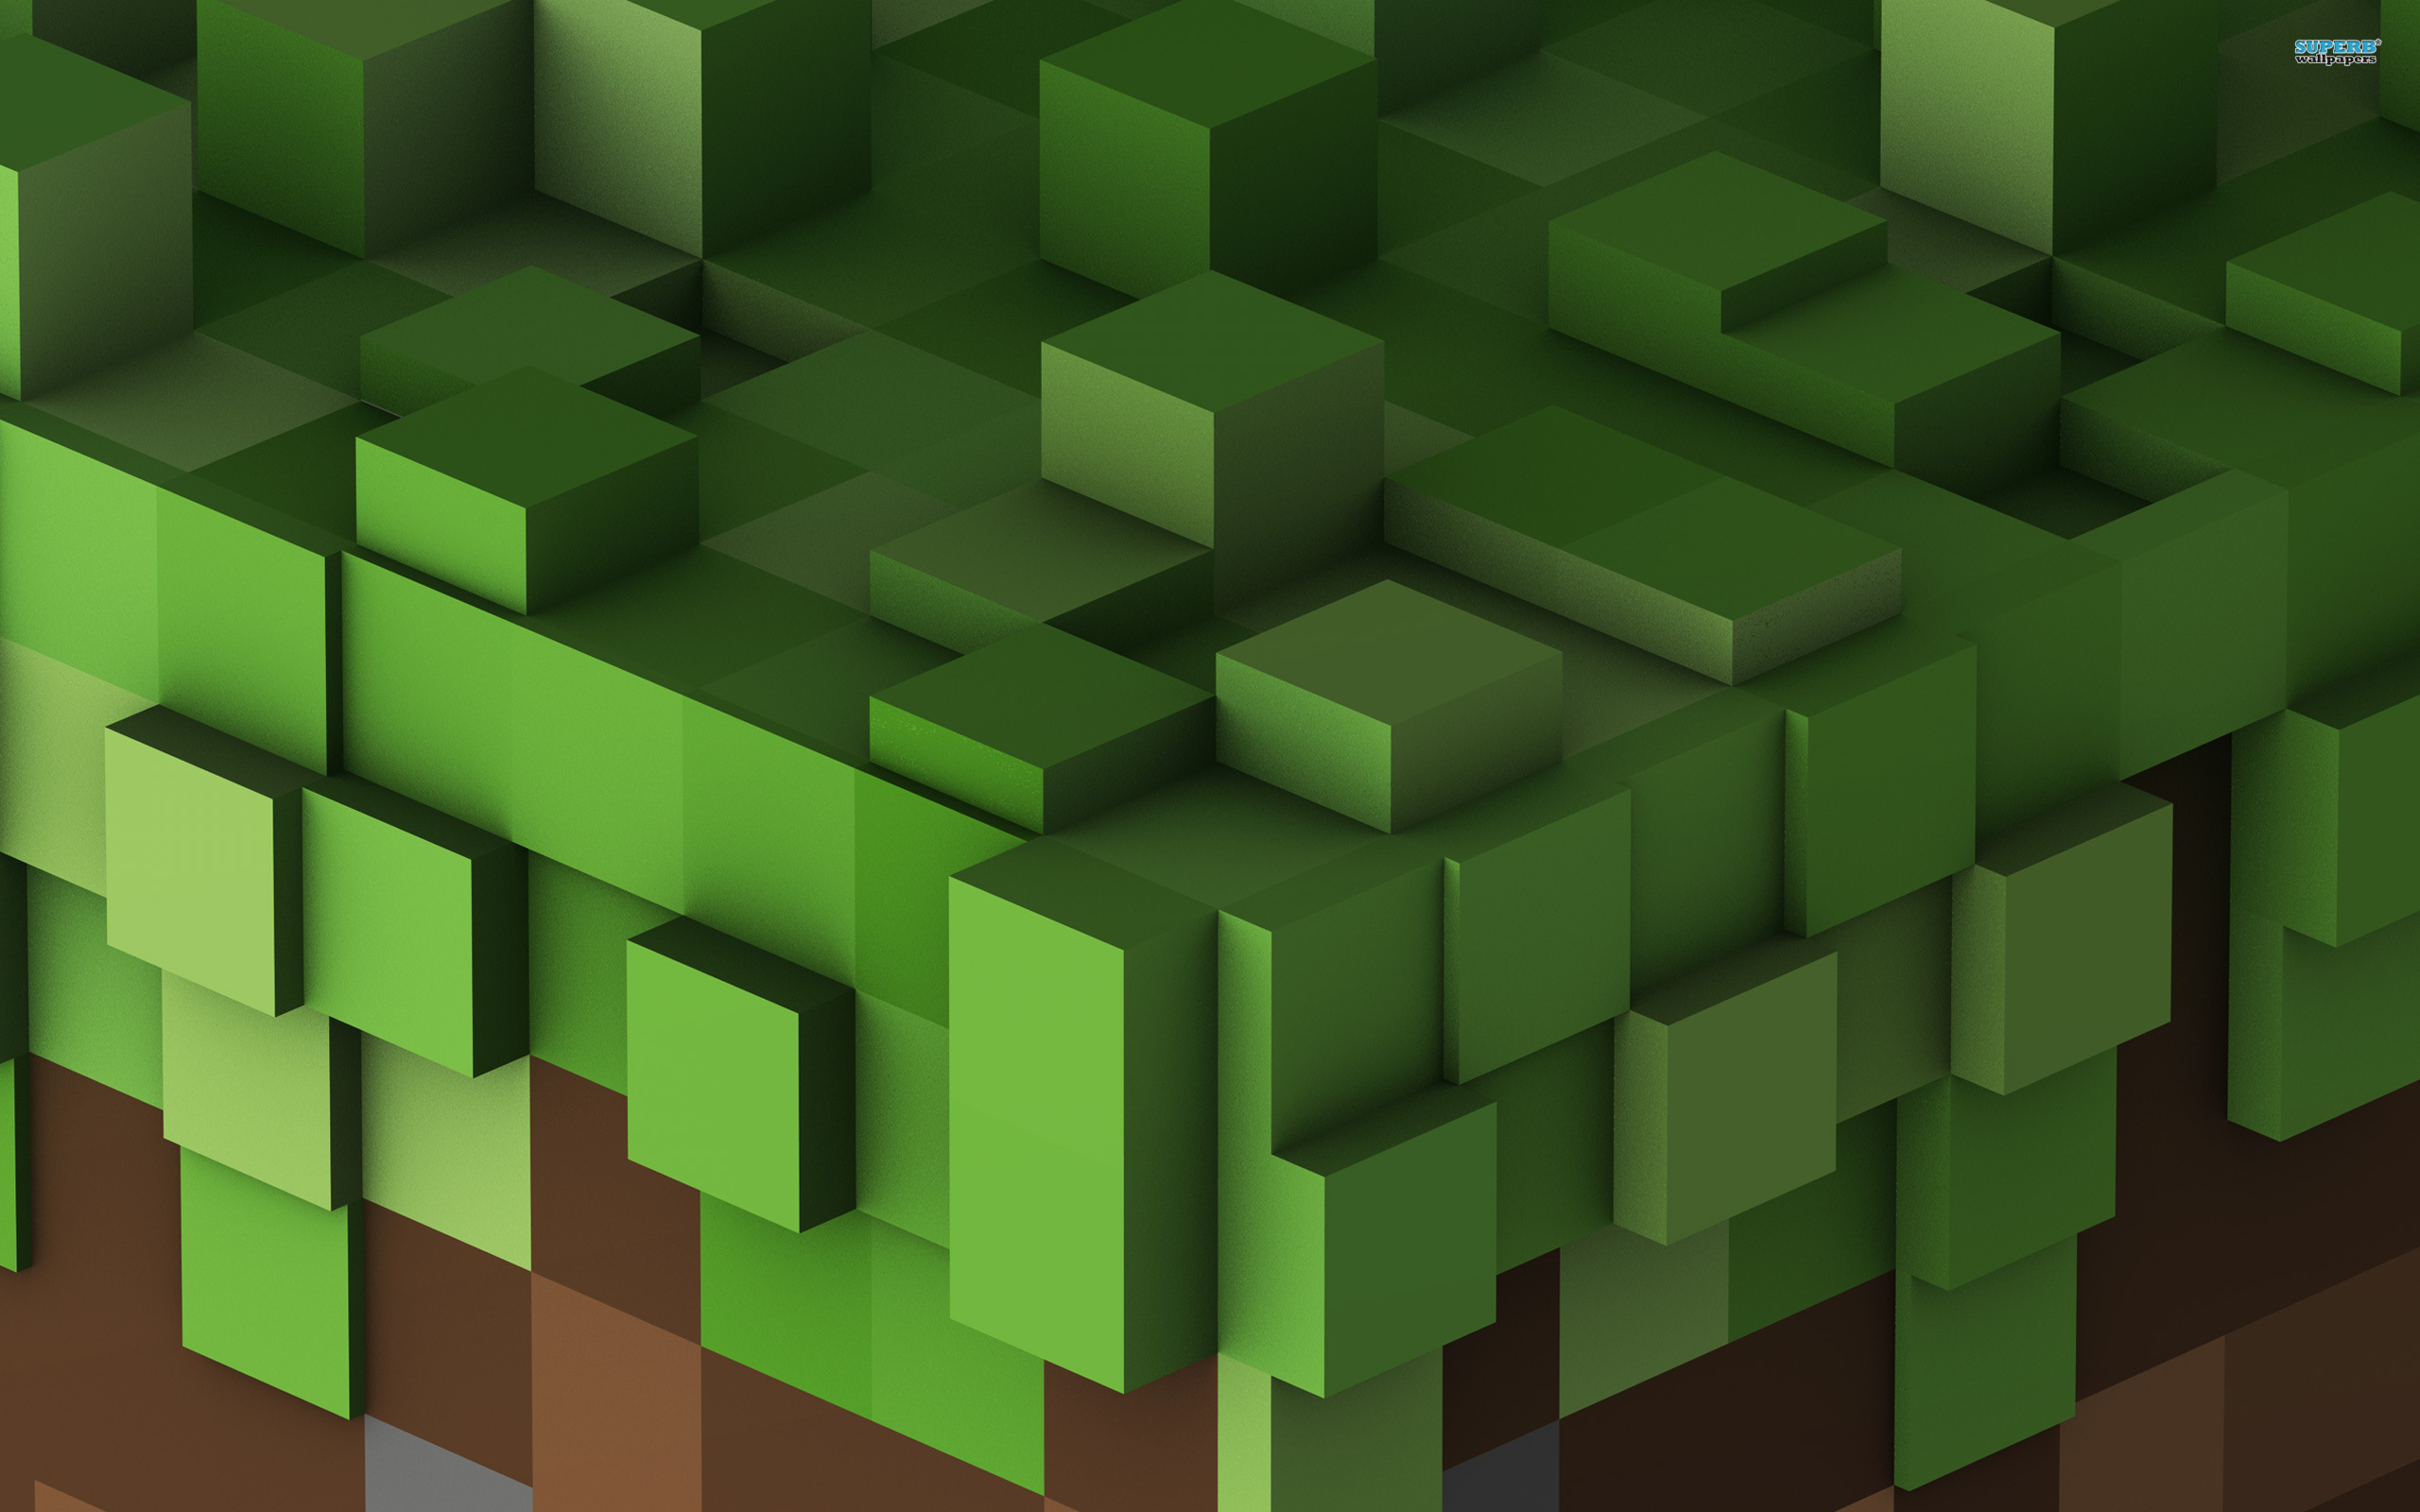  Minecraft we are giving away 4 HD Minecraft Wallpapers for your